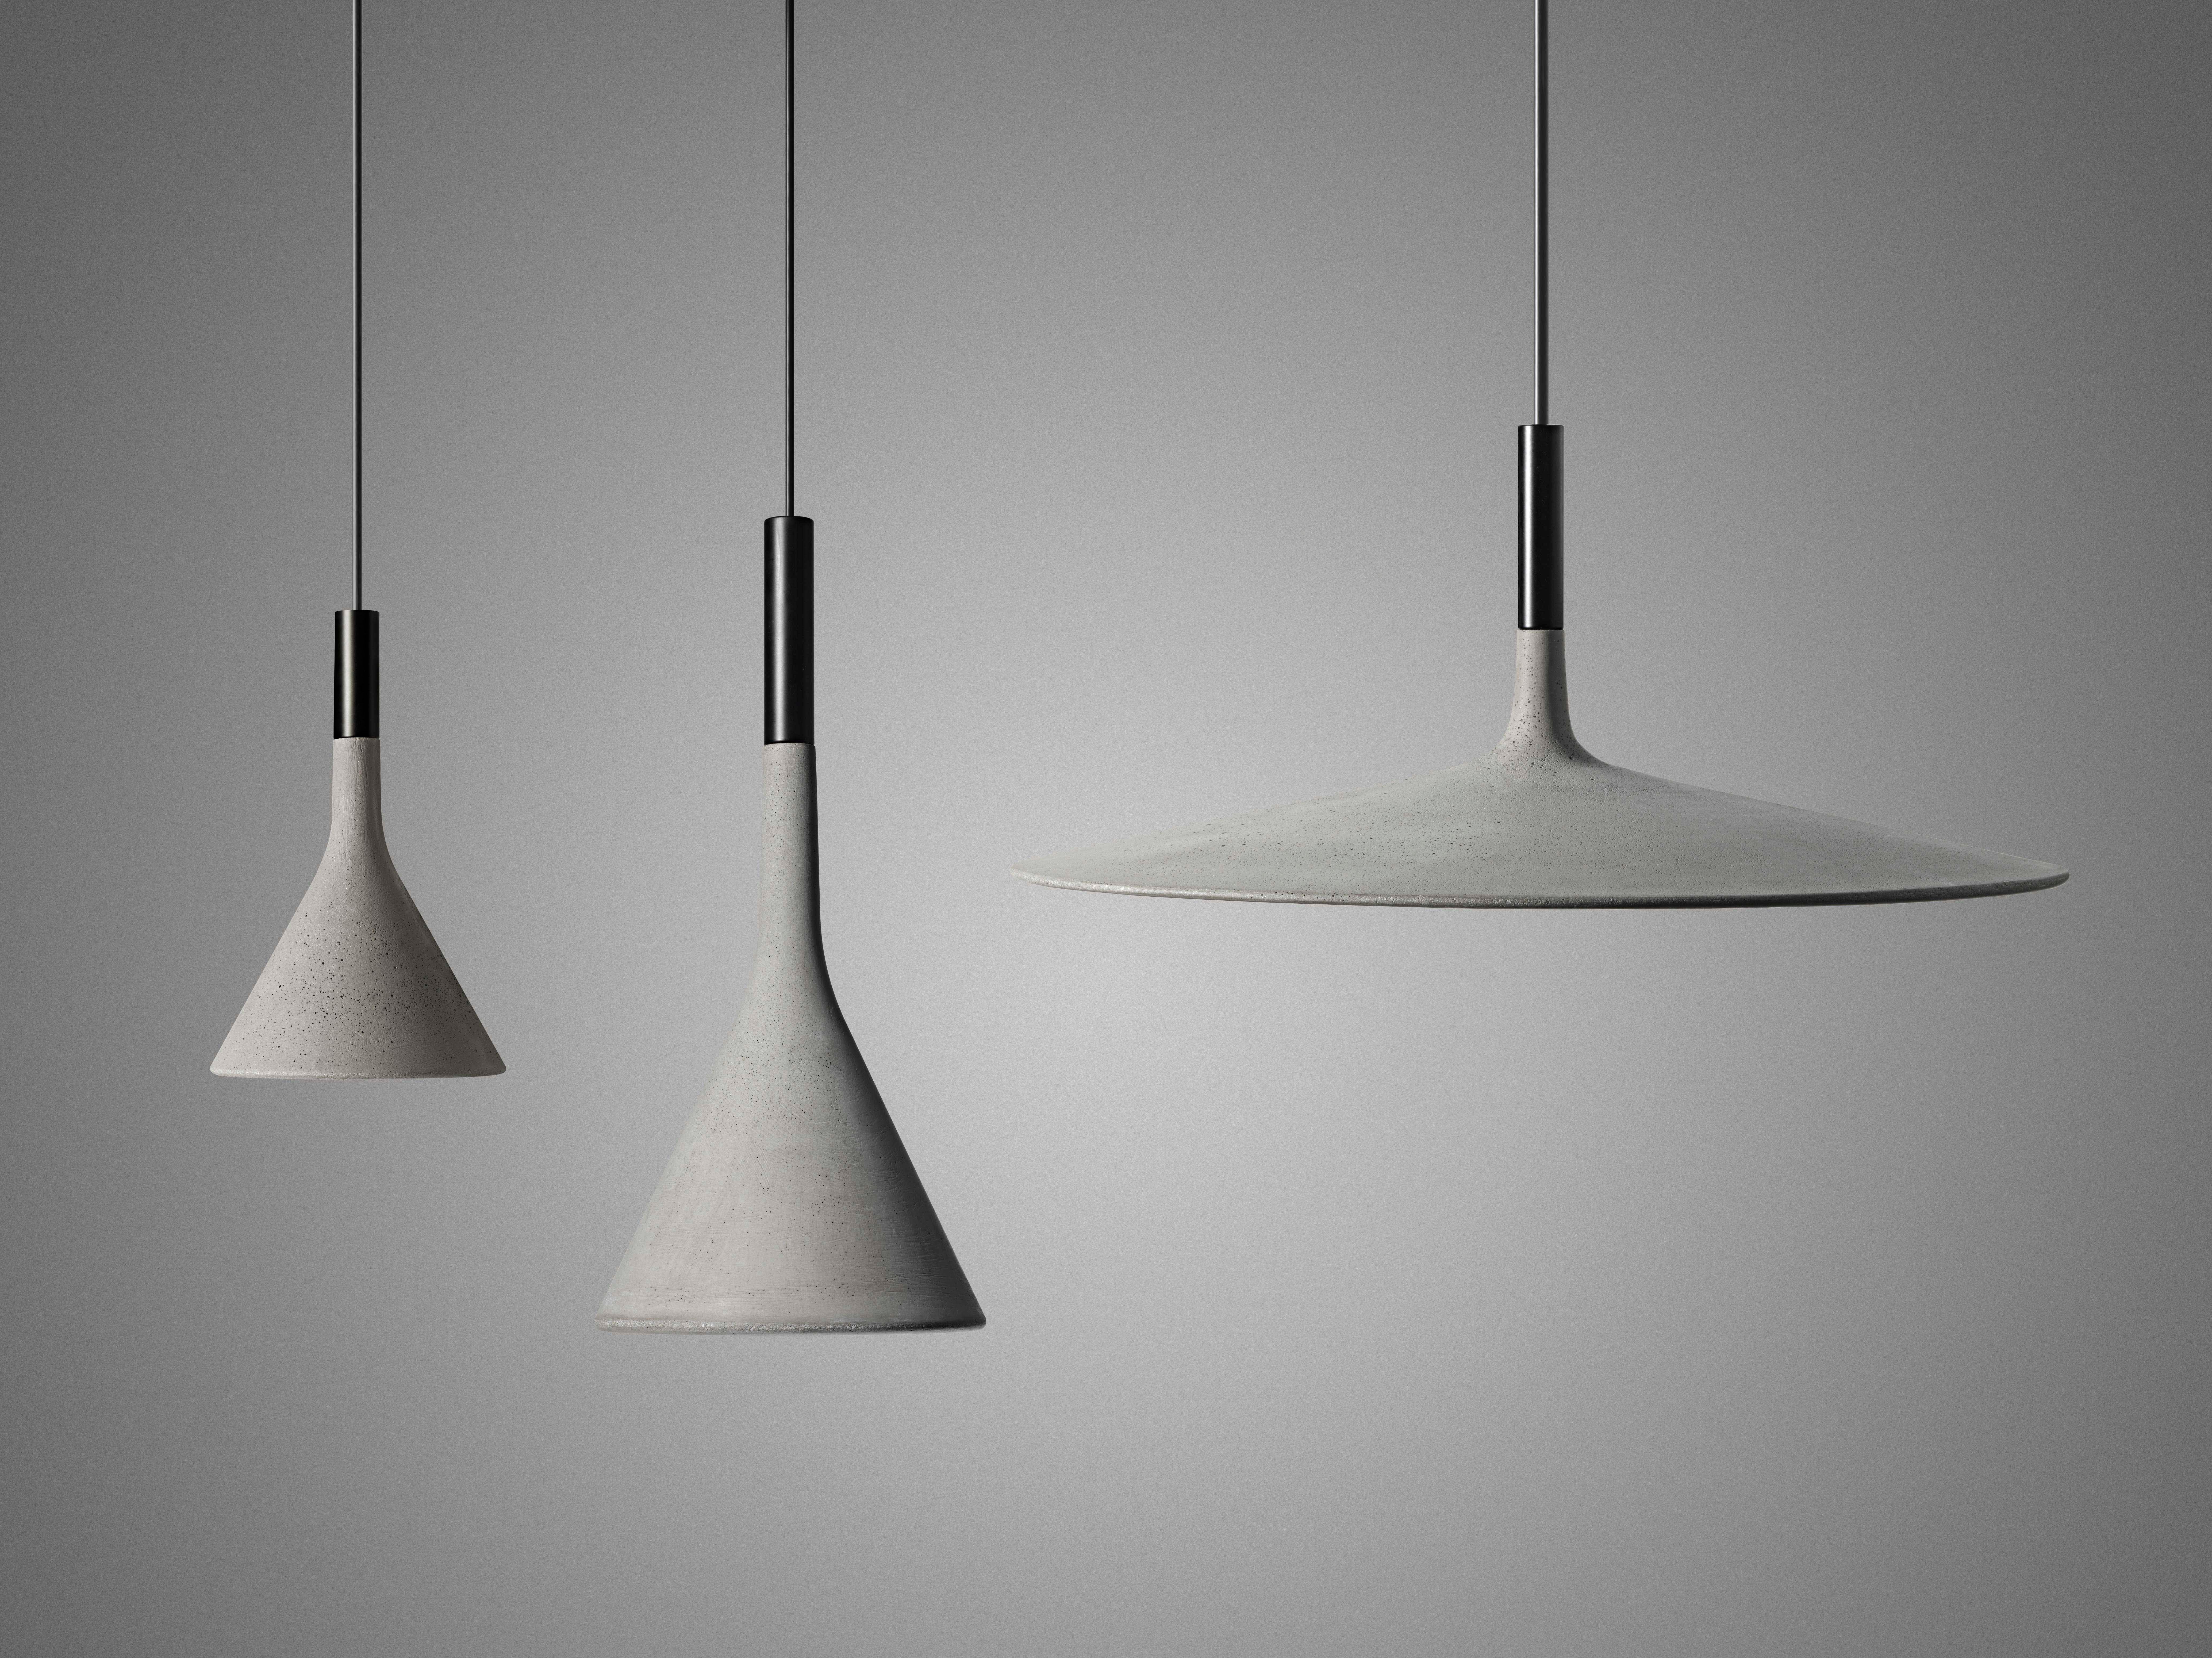 Suspension lamp with direct light. Cement diffuser, consisting off a special amalgam colored with pigments, produced by pouring the fluid mixture into a mold rose with galvanized metal bracket and batch dyed ABS cover. Black electrical cable and